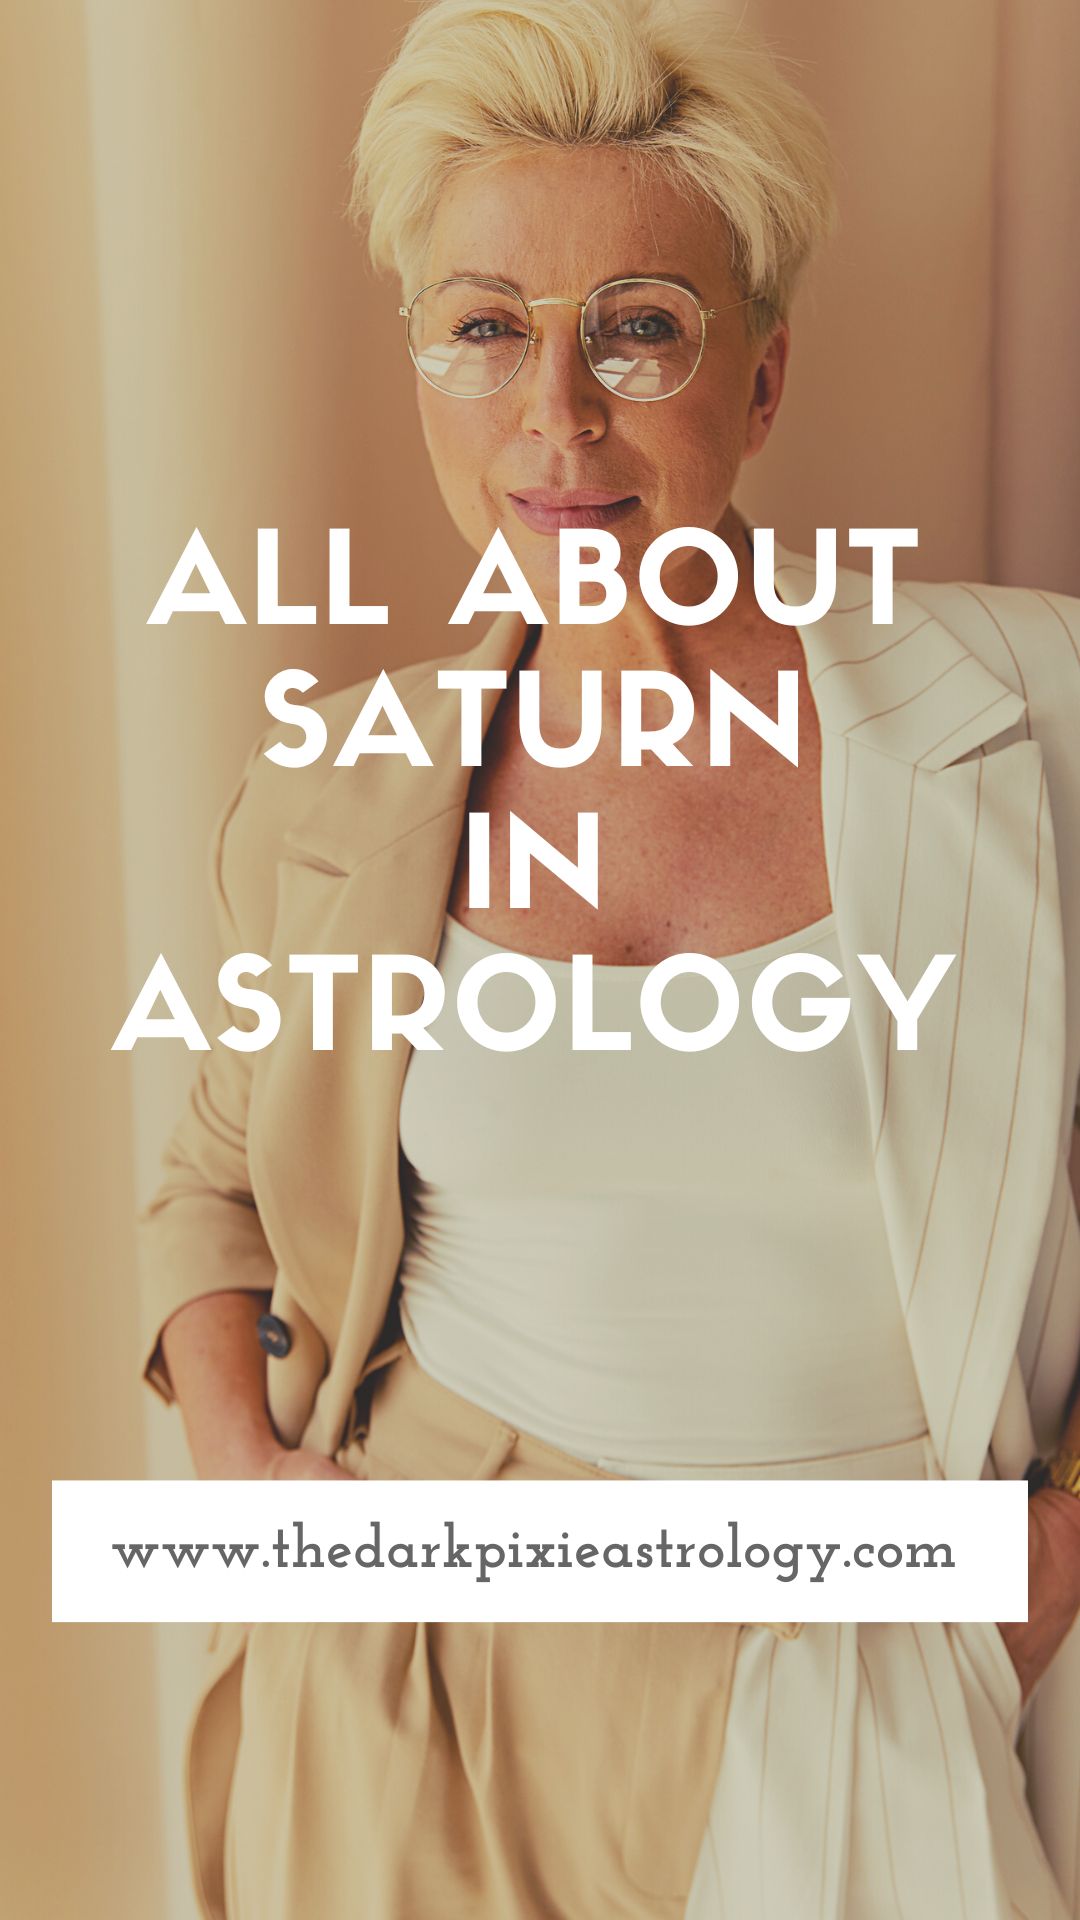 All About Saturn in Astrology - The Dark Pixie Astrology